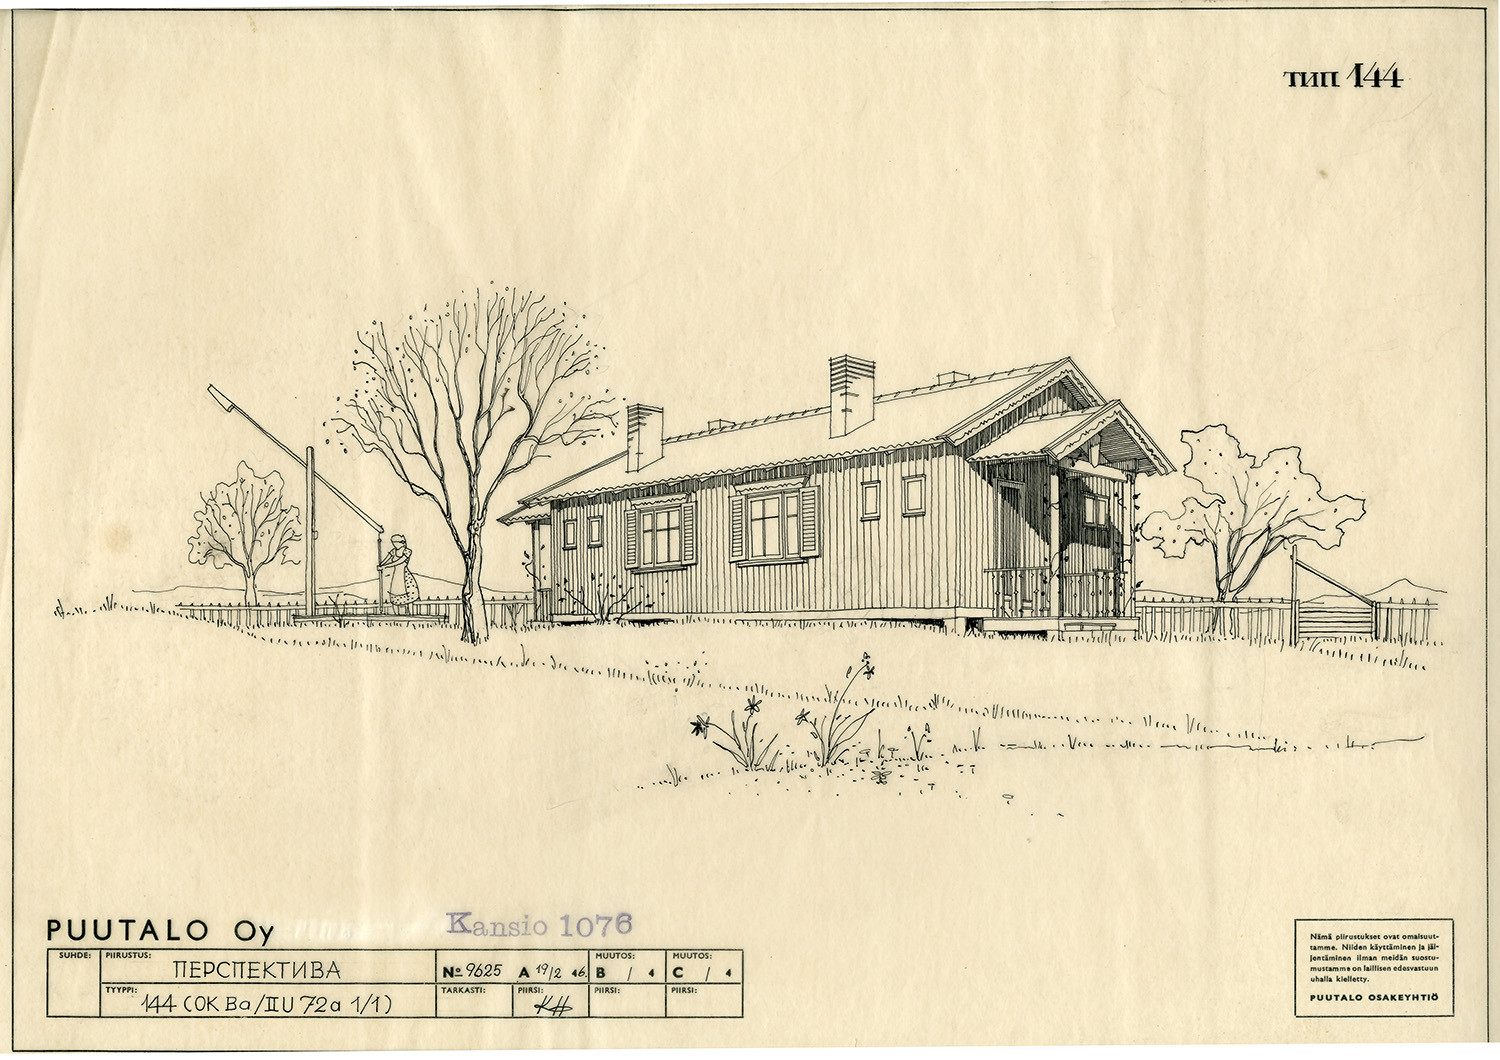 A drawing of a Puutalo Oy's house in the countryside. There is a woman in the yard fetching water from a well. There are flowers, trees and a lot of vegetation around.